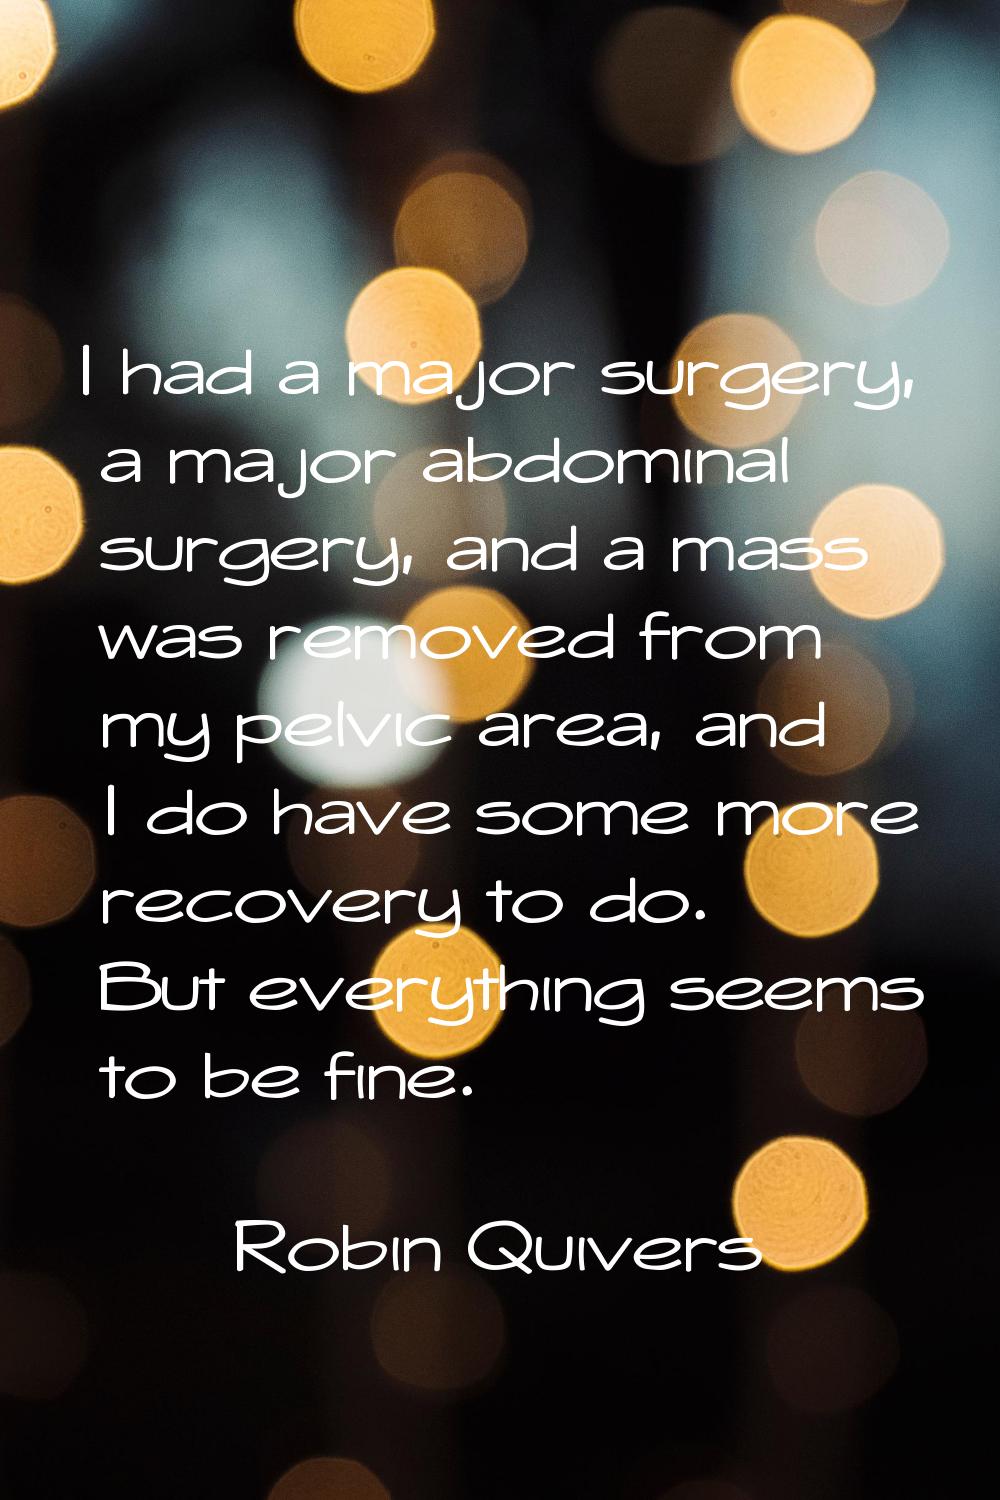 I had a major surgery, a major abdominal surgery, and a mass was removed from my pelvic area, and I